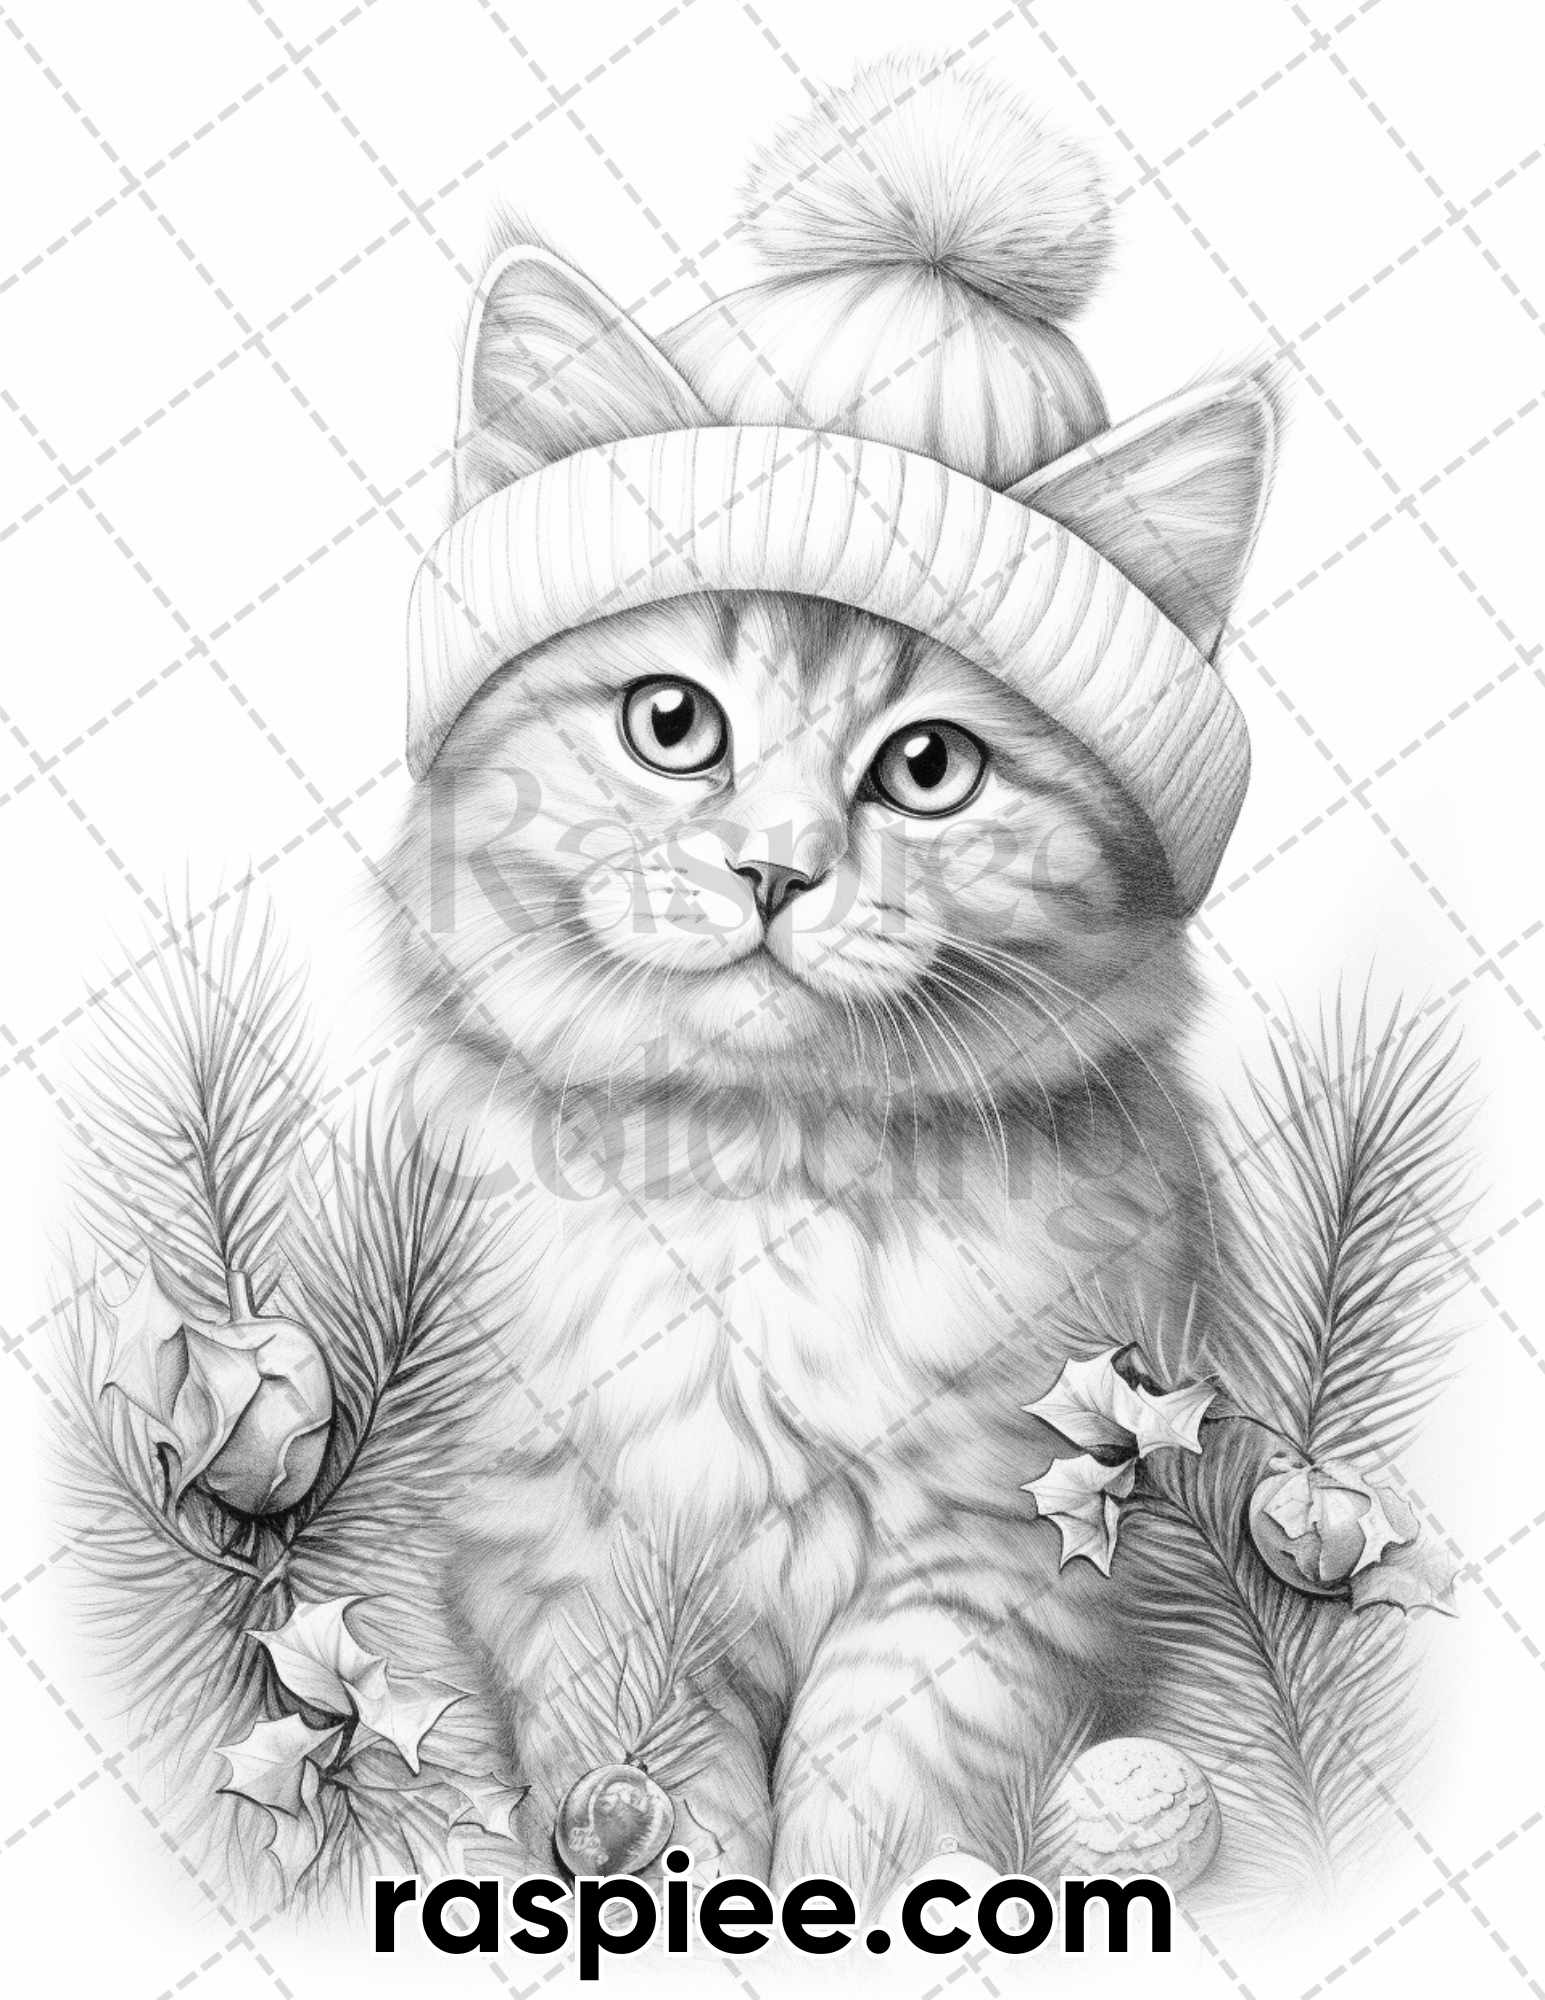 Christmas Cats Grayscale Coloring Page, Adult Coloring Book Cat Illustration, Xmas Cat Coloring Sheet for Download, Winter Cat Coloring Pages, Winter Animal Coloring Pages, Christmas Coloring Pages, Xmas Coloring Pages, Christmas Coloring Book Printable, Holiday Coloring Pages, Pet Coloring Pages, Kitten Coloring Pages